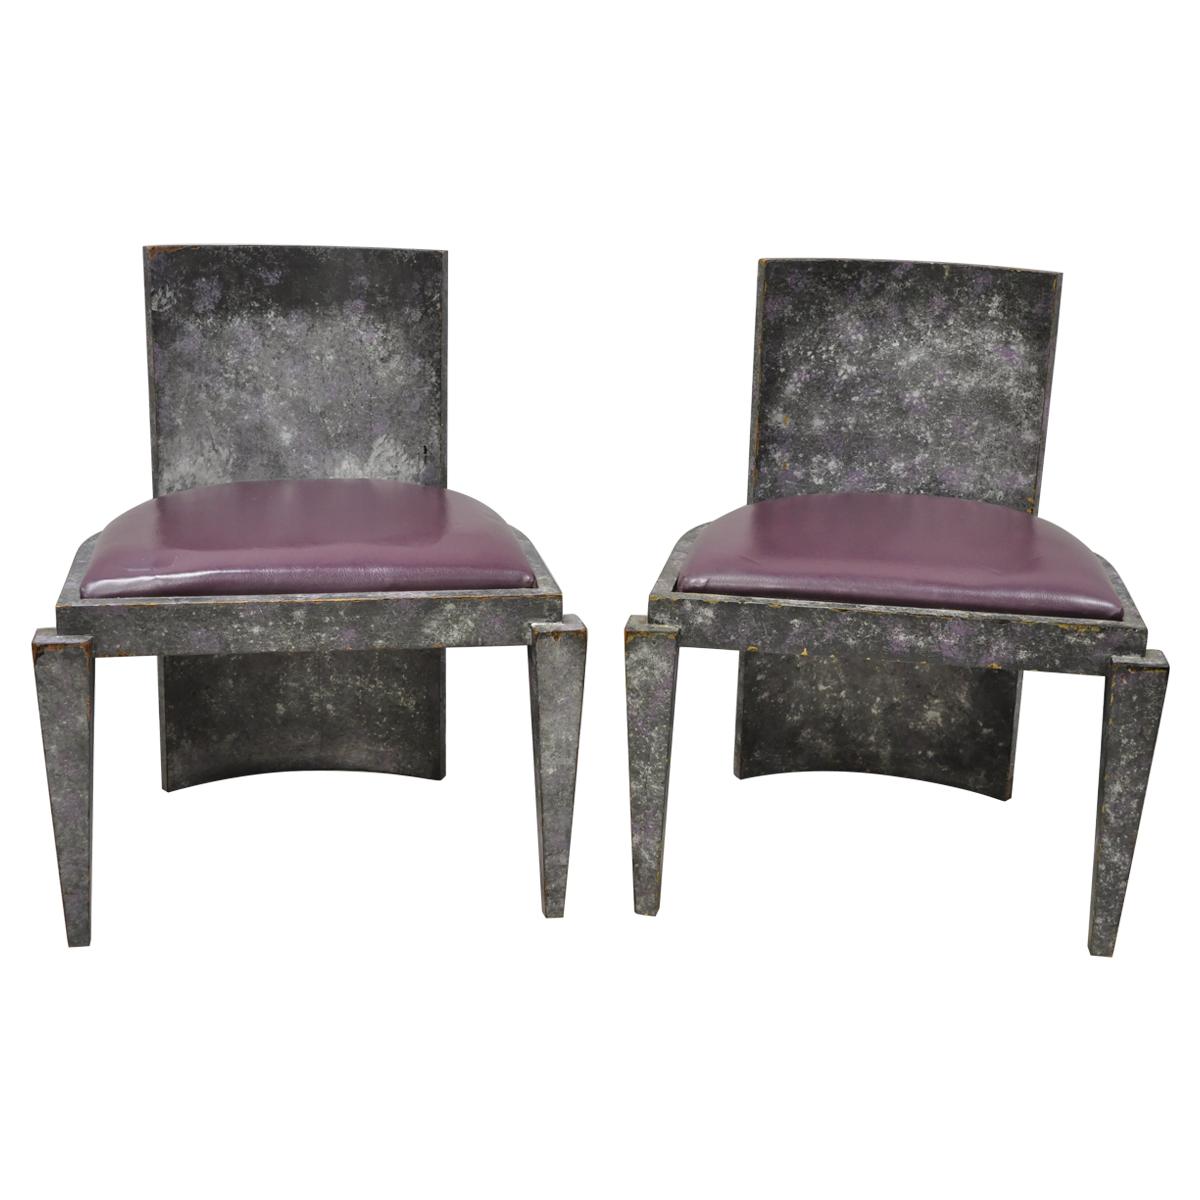 Vintage Mid-Century Modern Art Deco Purple and Gray Club Game Chairs, a Pair